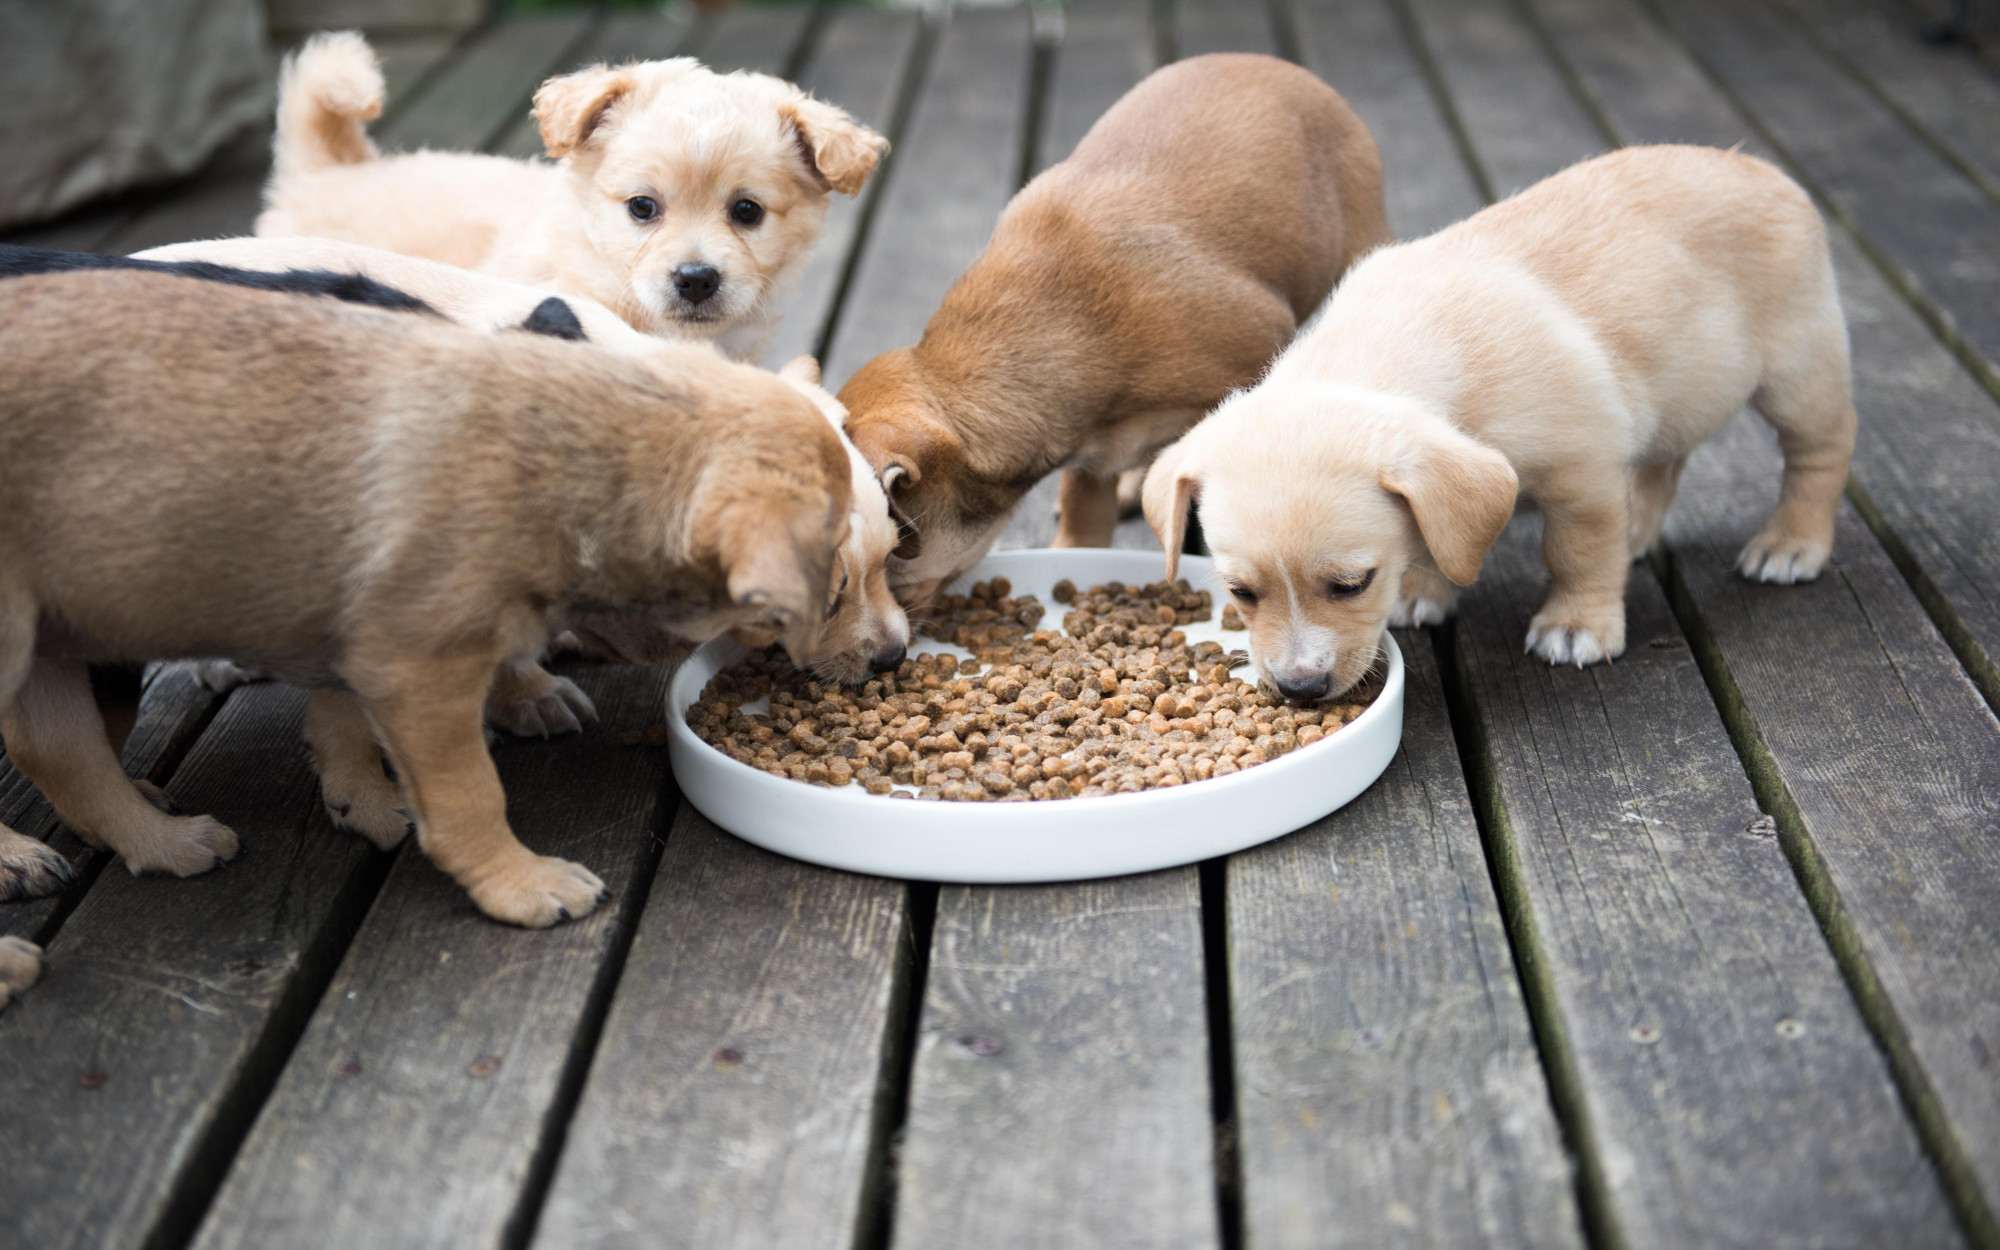 Purina Says Its Products Are Safe as Claims of Sick Pets Stir Social Media